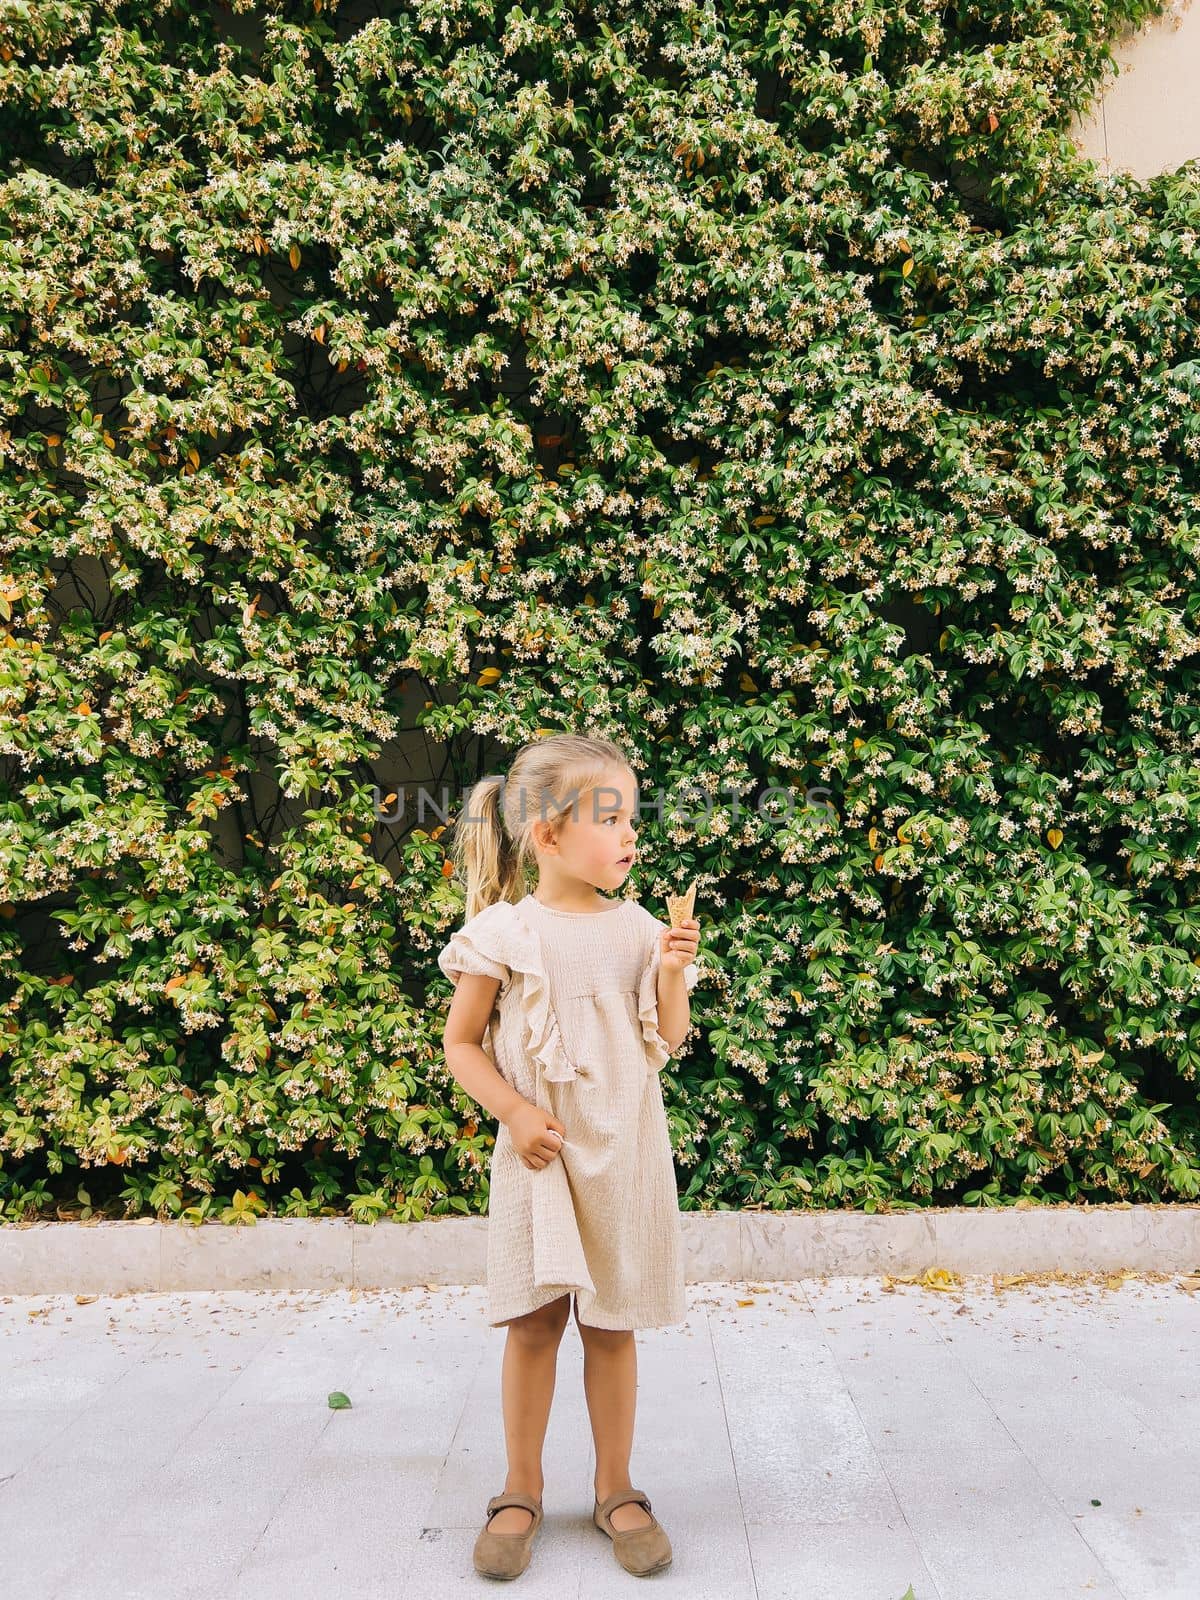 Little girl with an ice cream cone stands on a tile near a green hedge. High quality photo